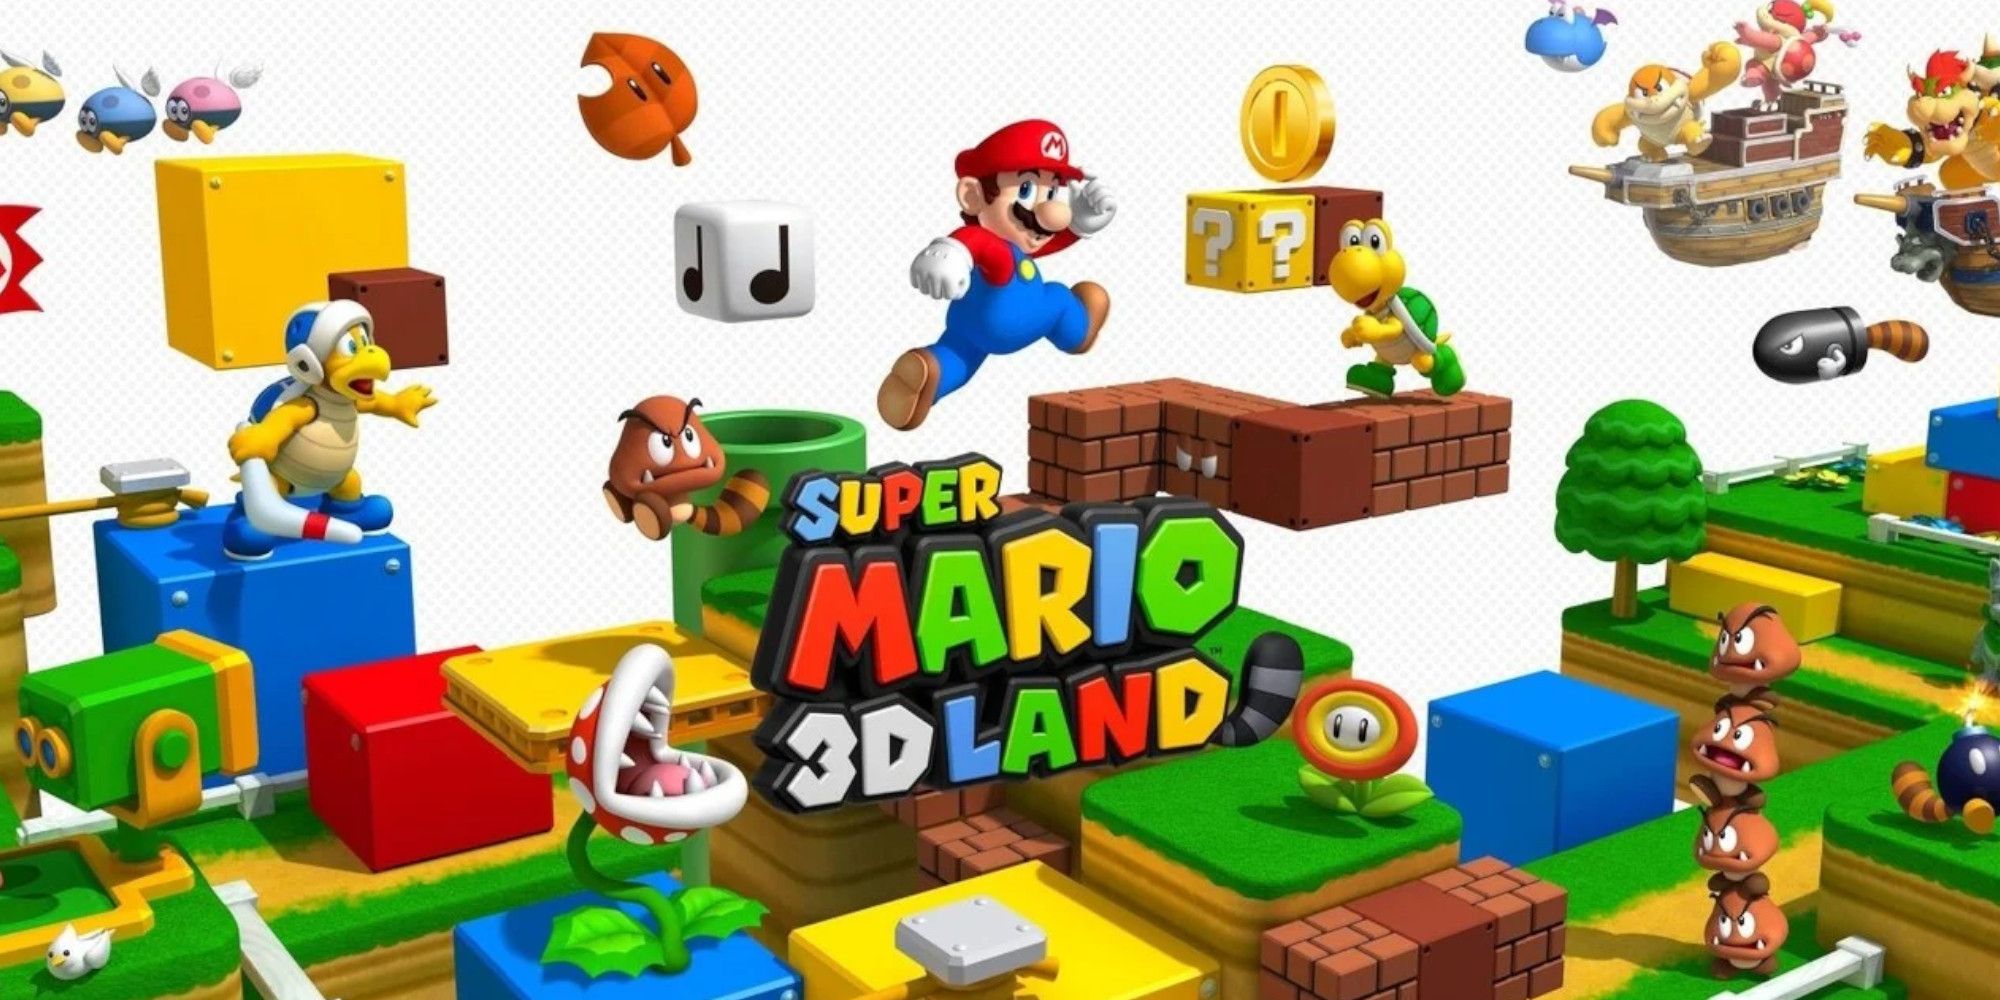 The official artwork of Super Mario 3D Land